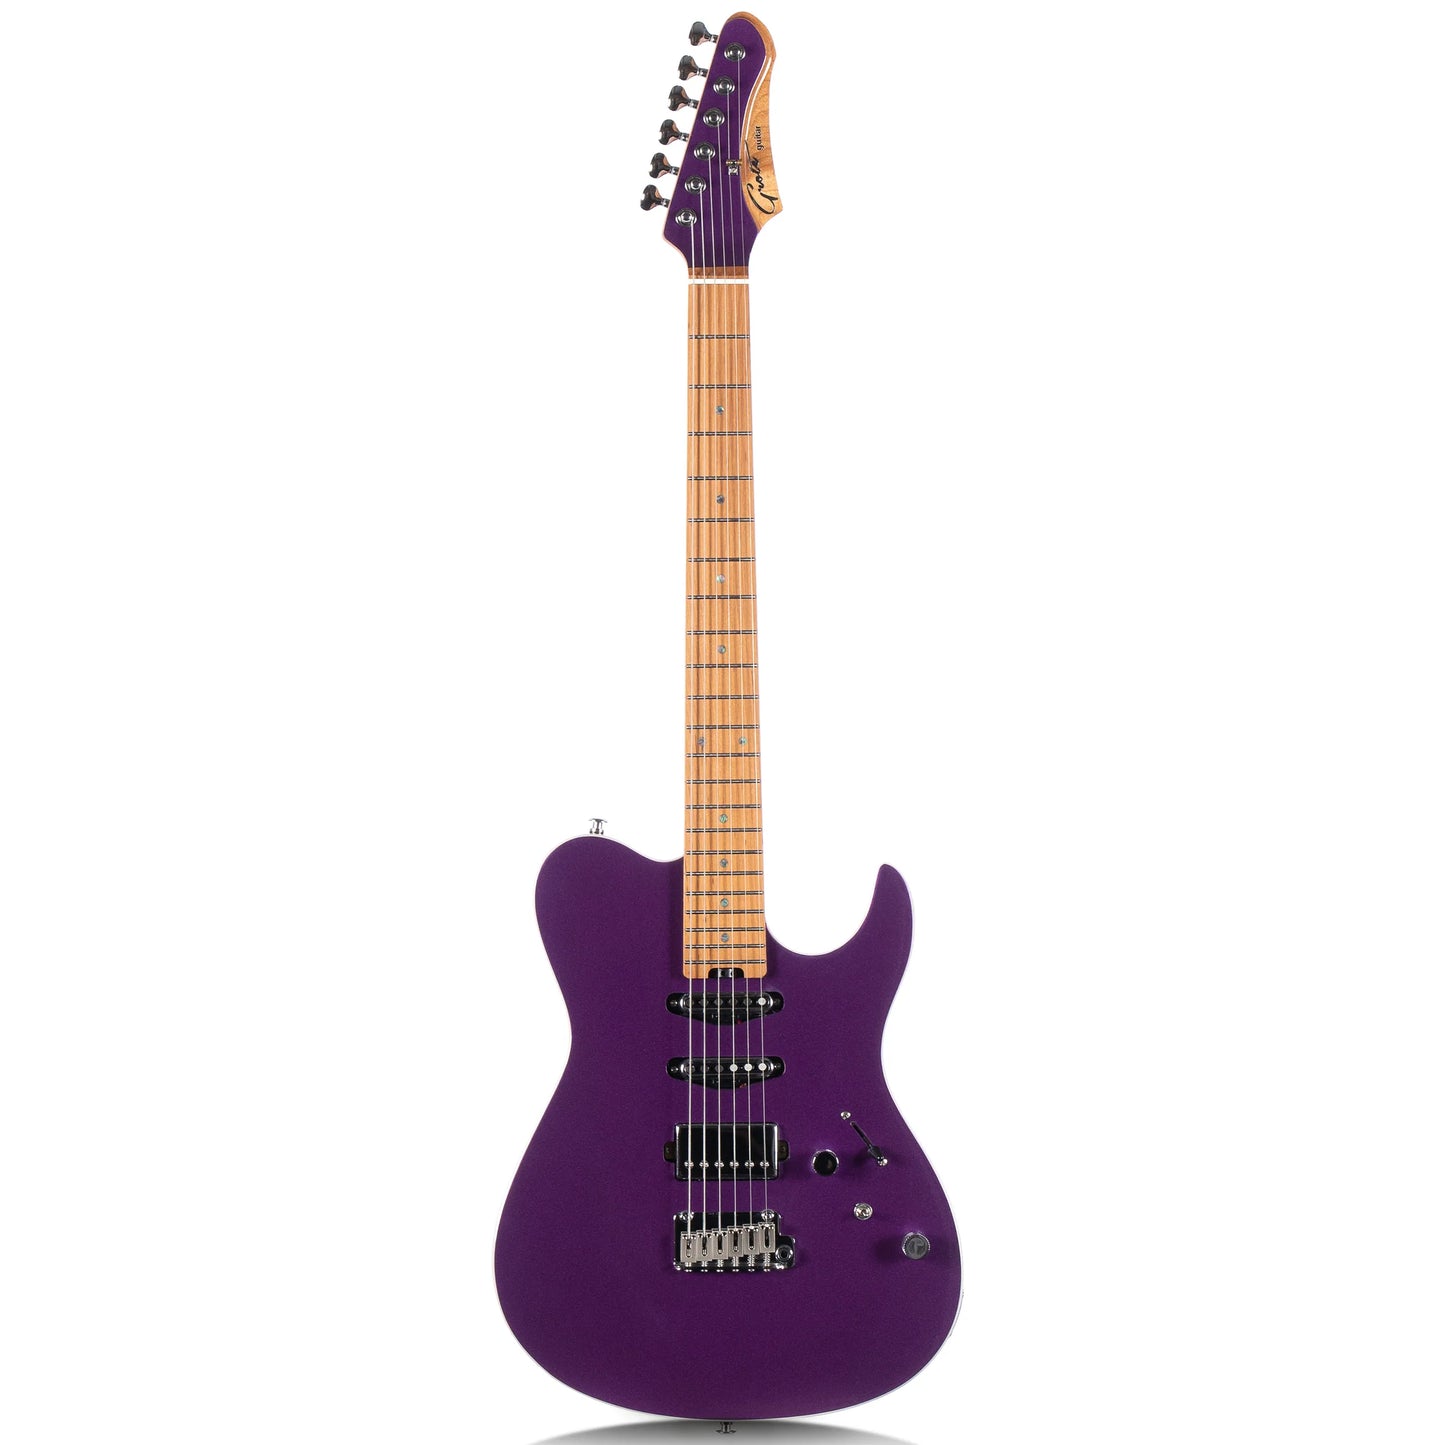 GROTE SOLID ELECTRIC GUITAR GR-MODERN-T METALLIC FINISH POPLAR BODY ROASTED MAPLE NECK COILS SPLITTING PICKUP WITH GIGBAG